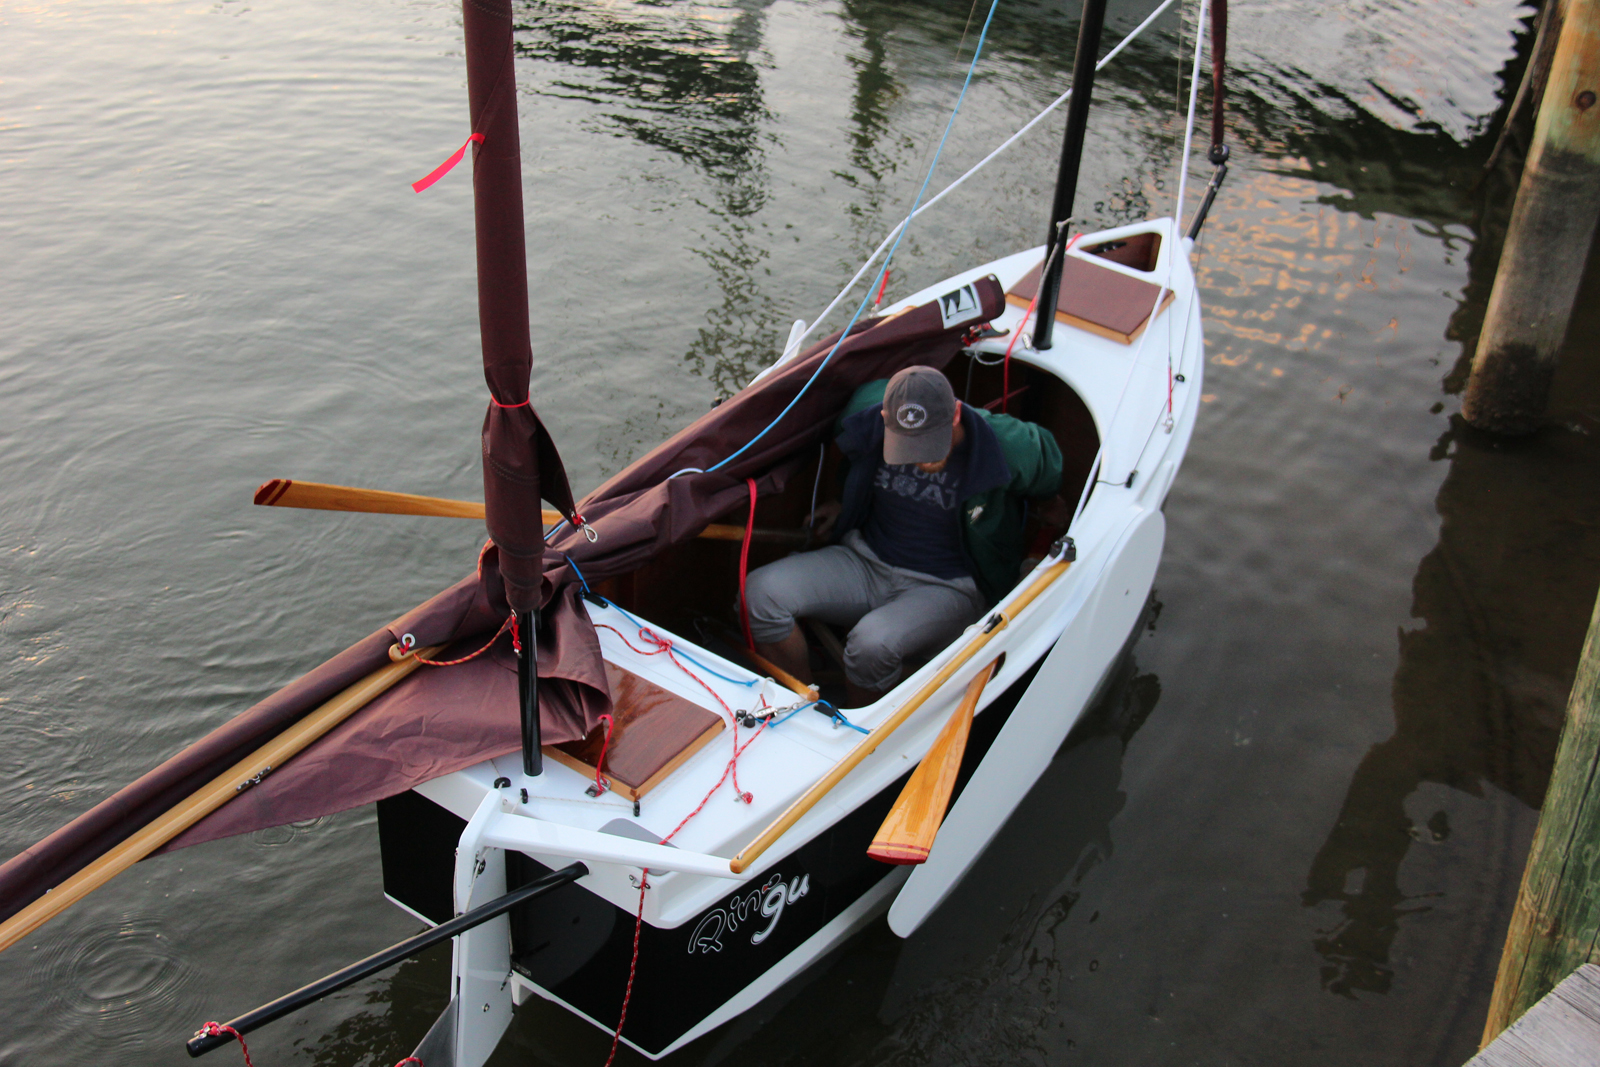 Nesting Expedition Dinghy